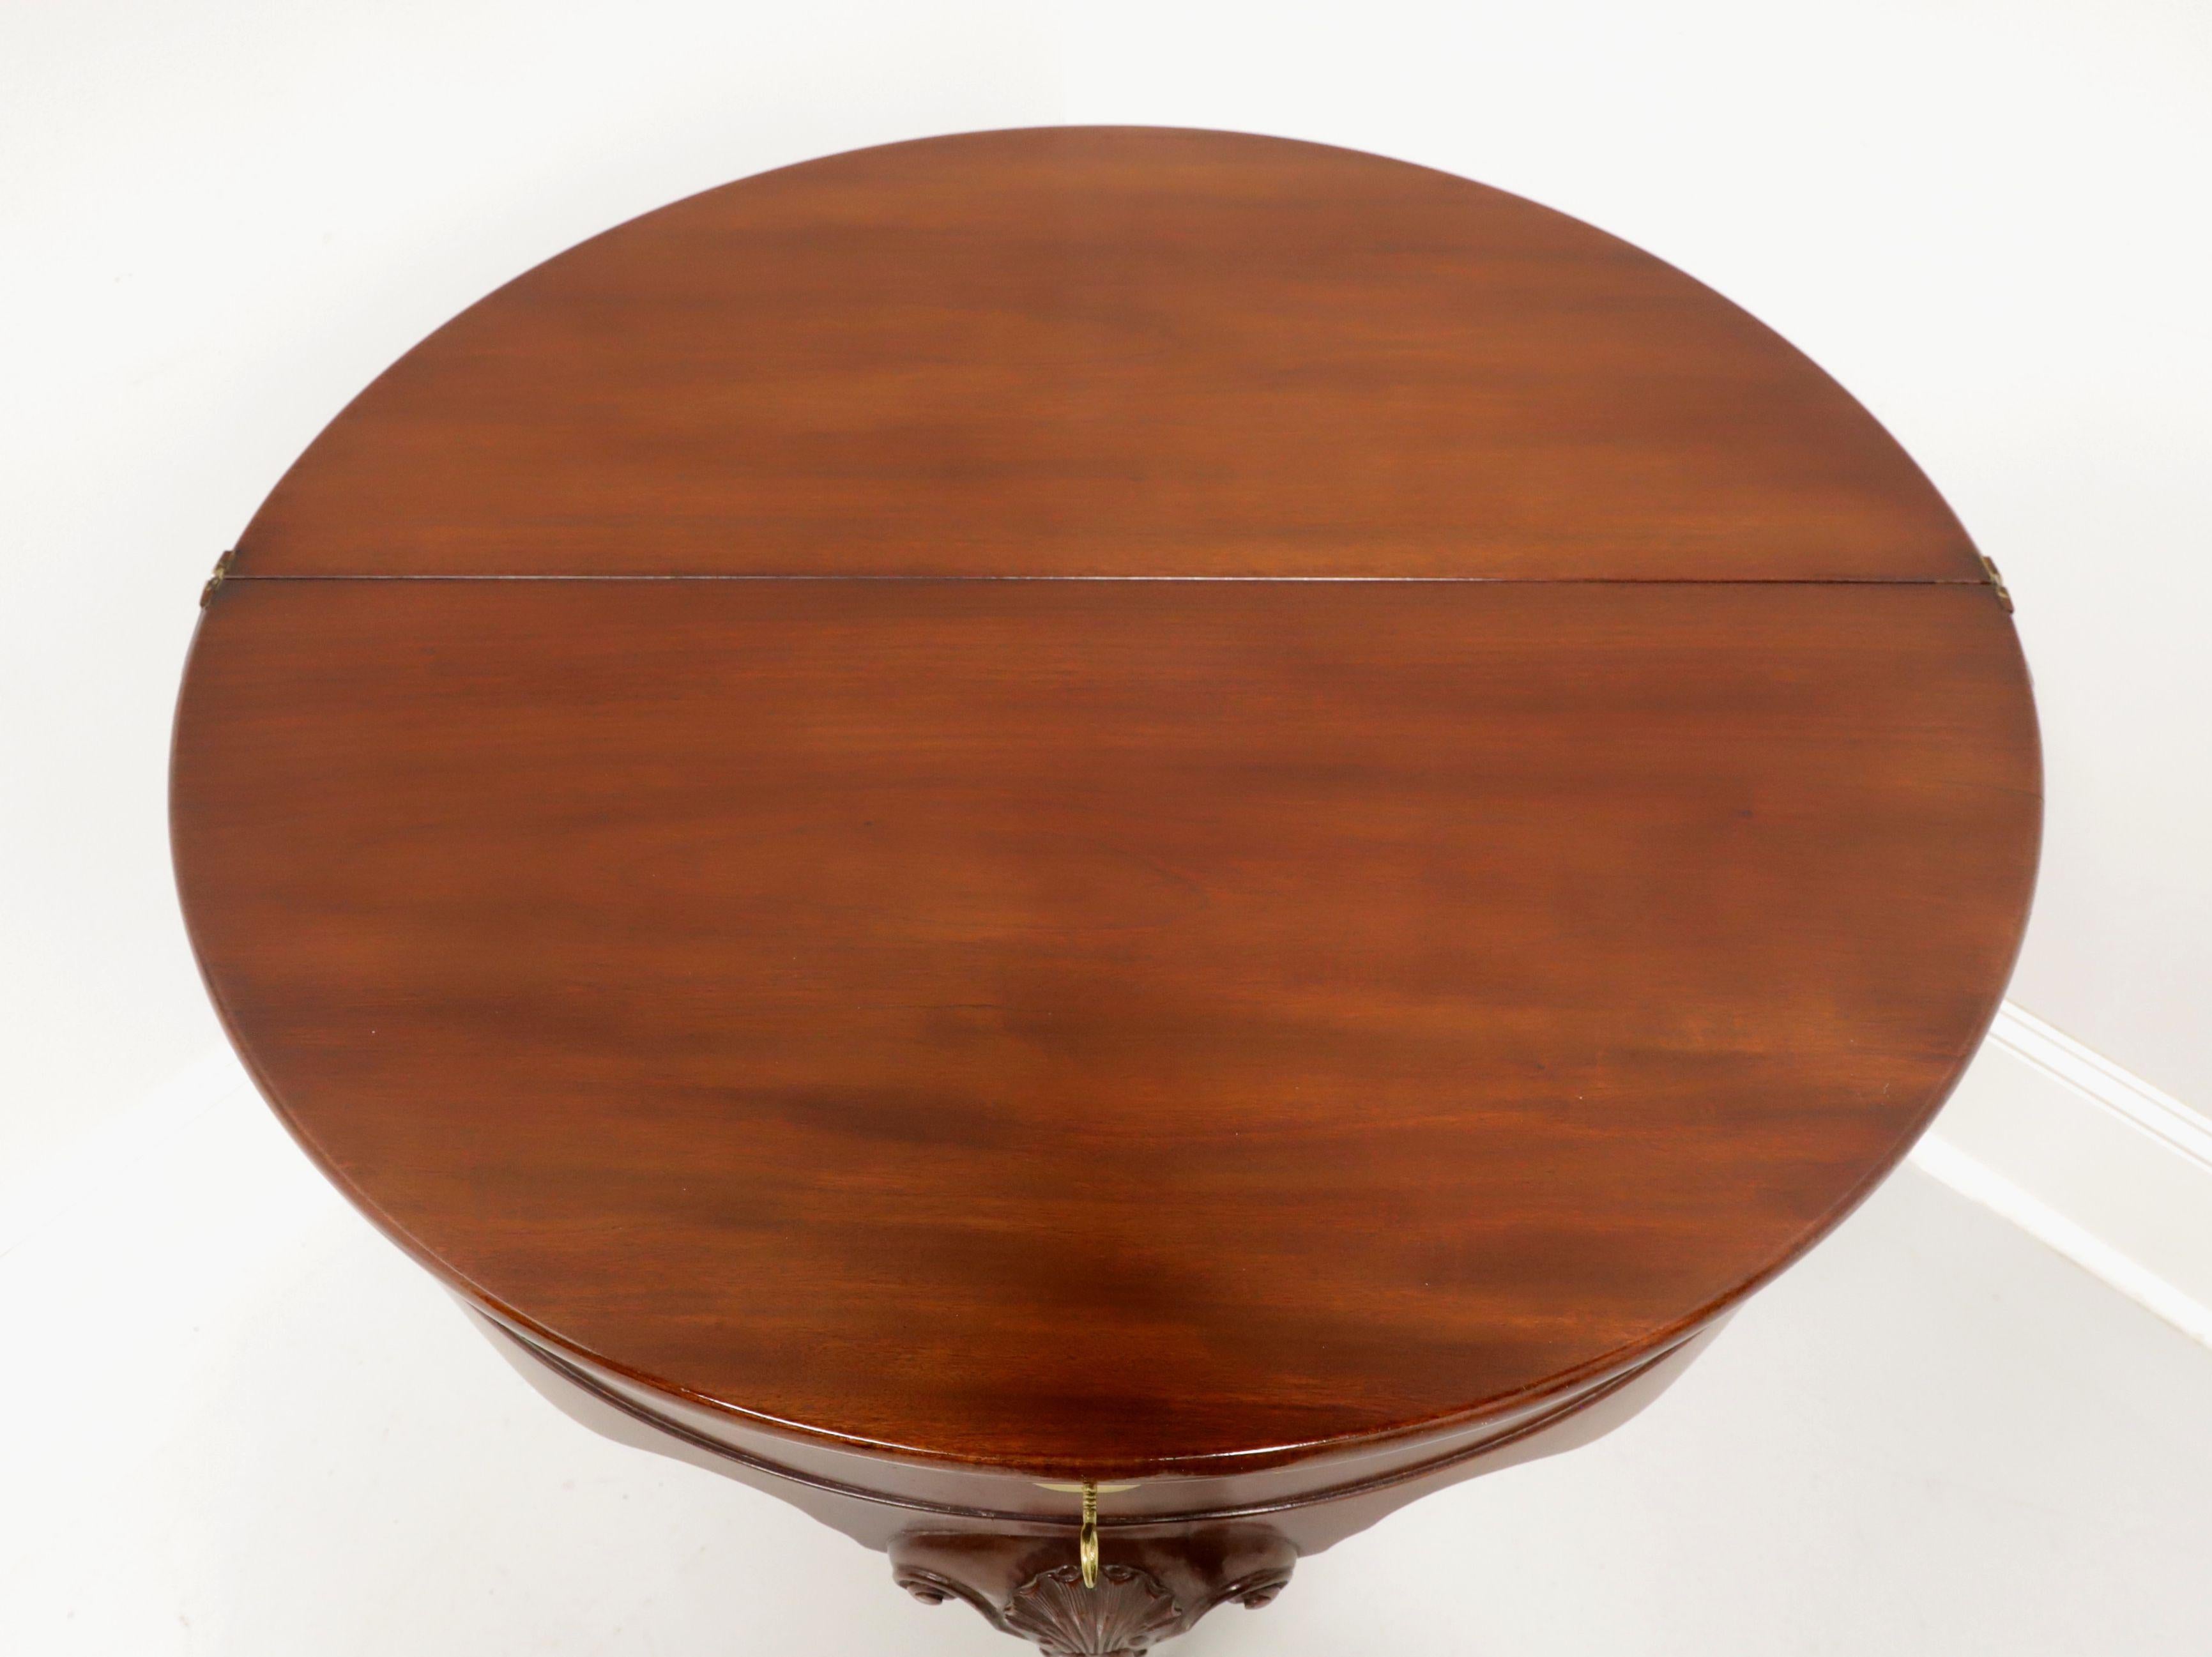 Mahogany KITTINGER Colonial Williamsburg CW156 Clawfoot Flip Top Demilune to Round Table